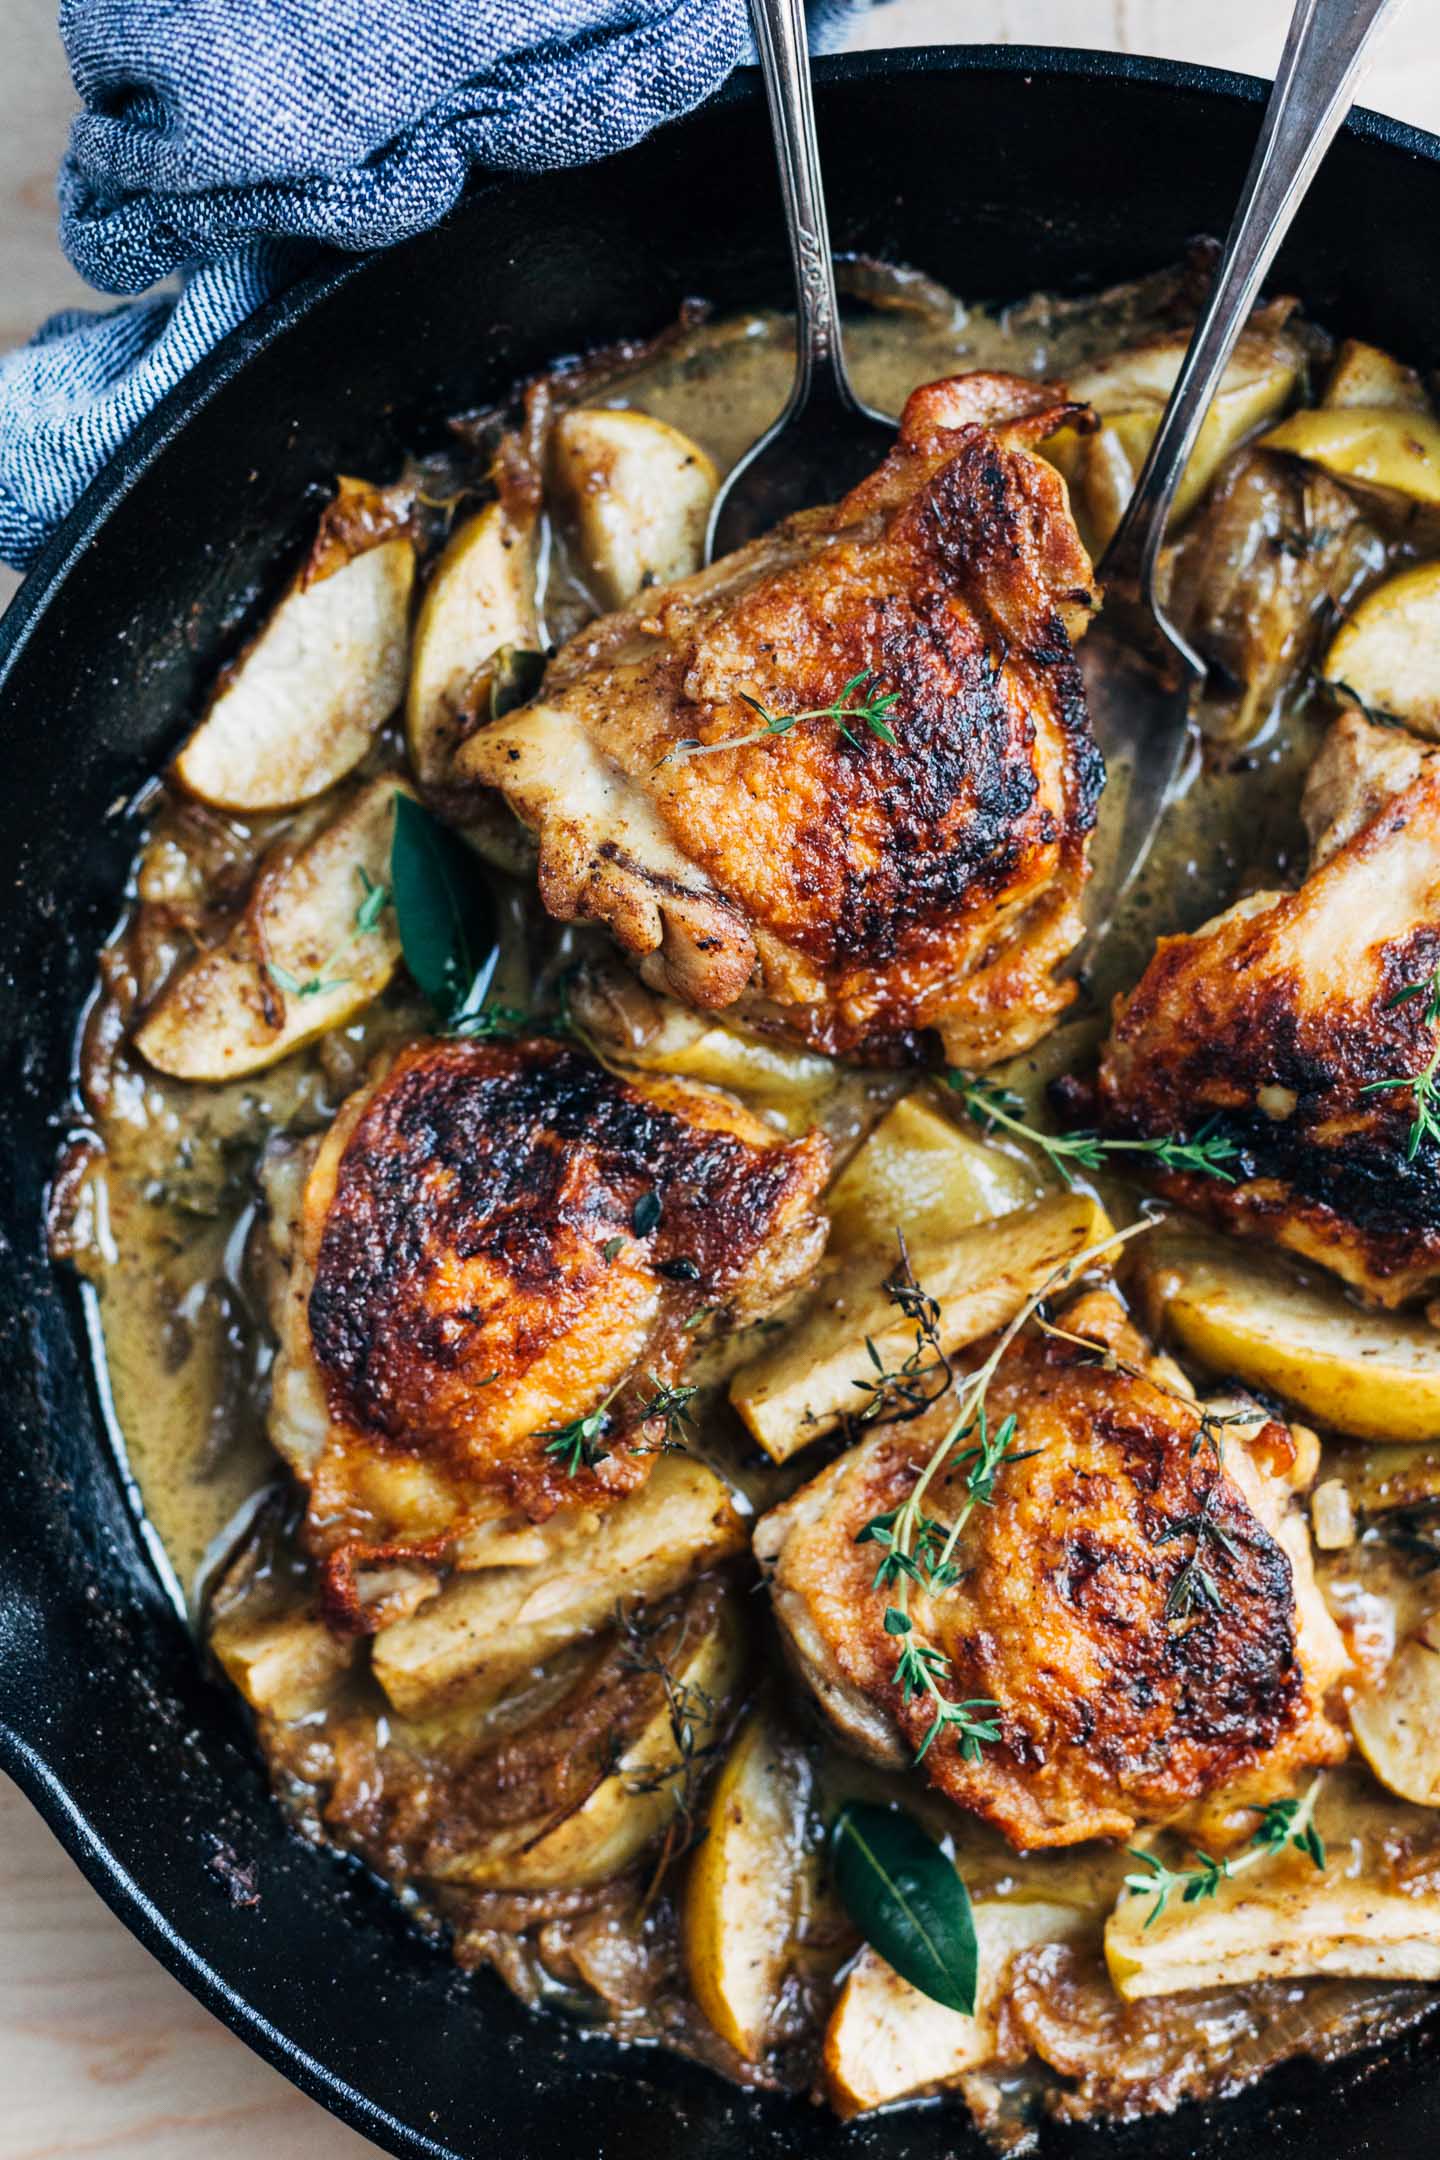 With crisp, golden skin and succulent meat, cider-braised chicken with apples, herbs, and caramelized onions makes for a classic autumn meal.